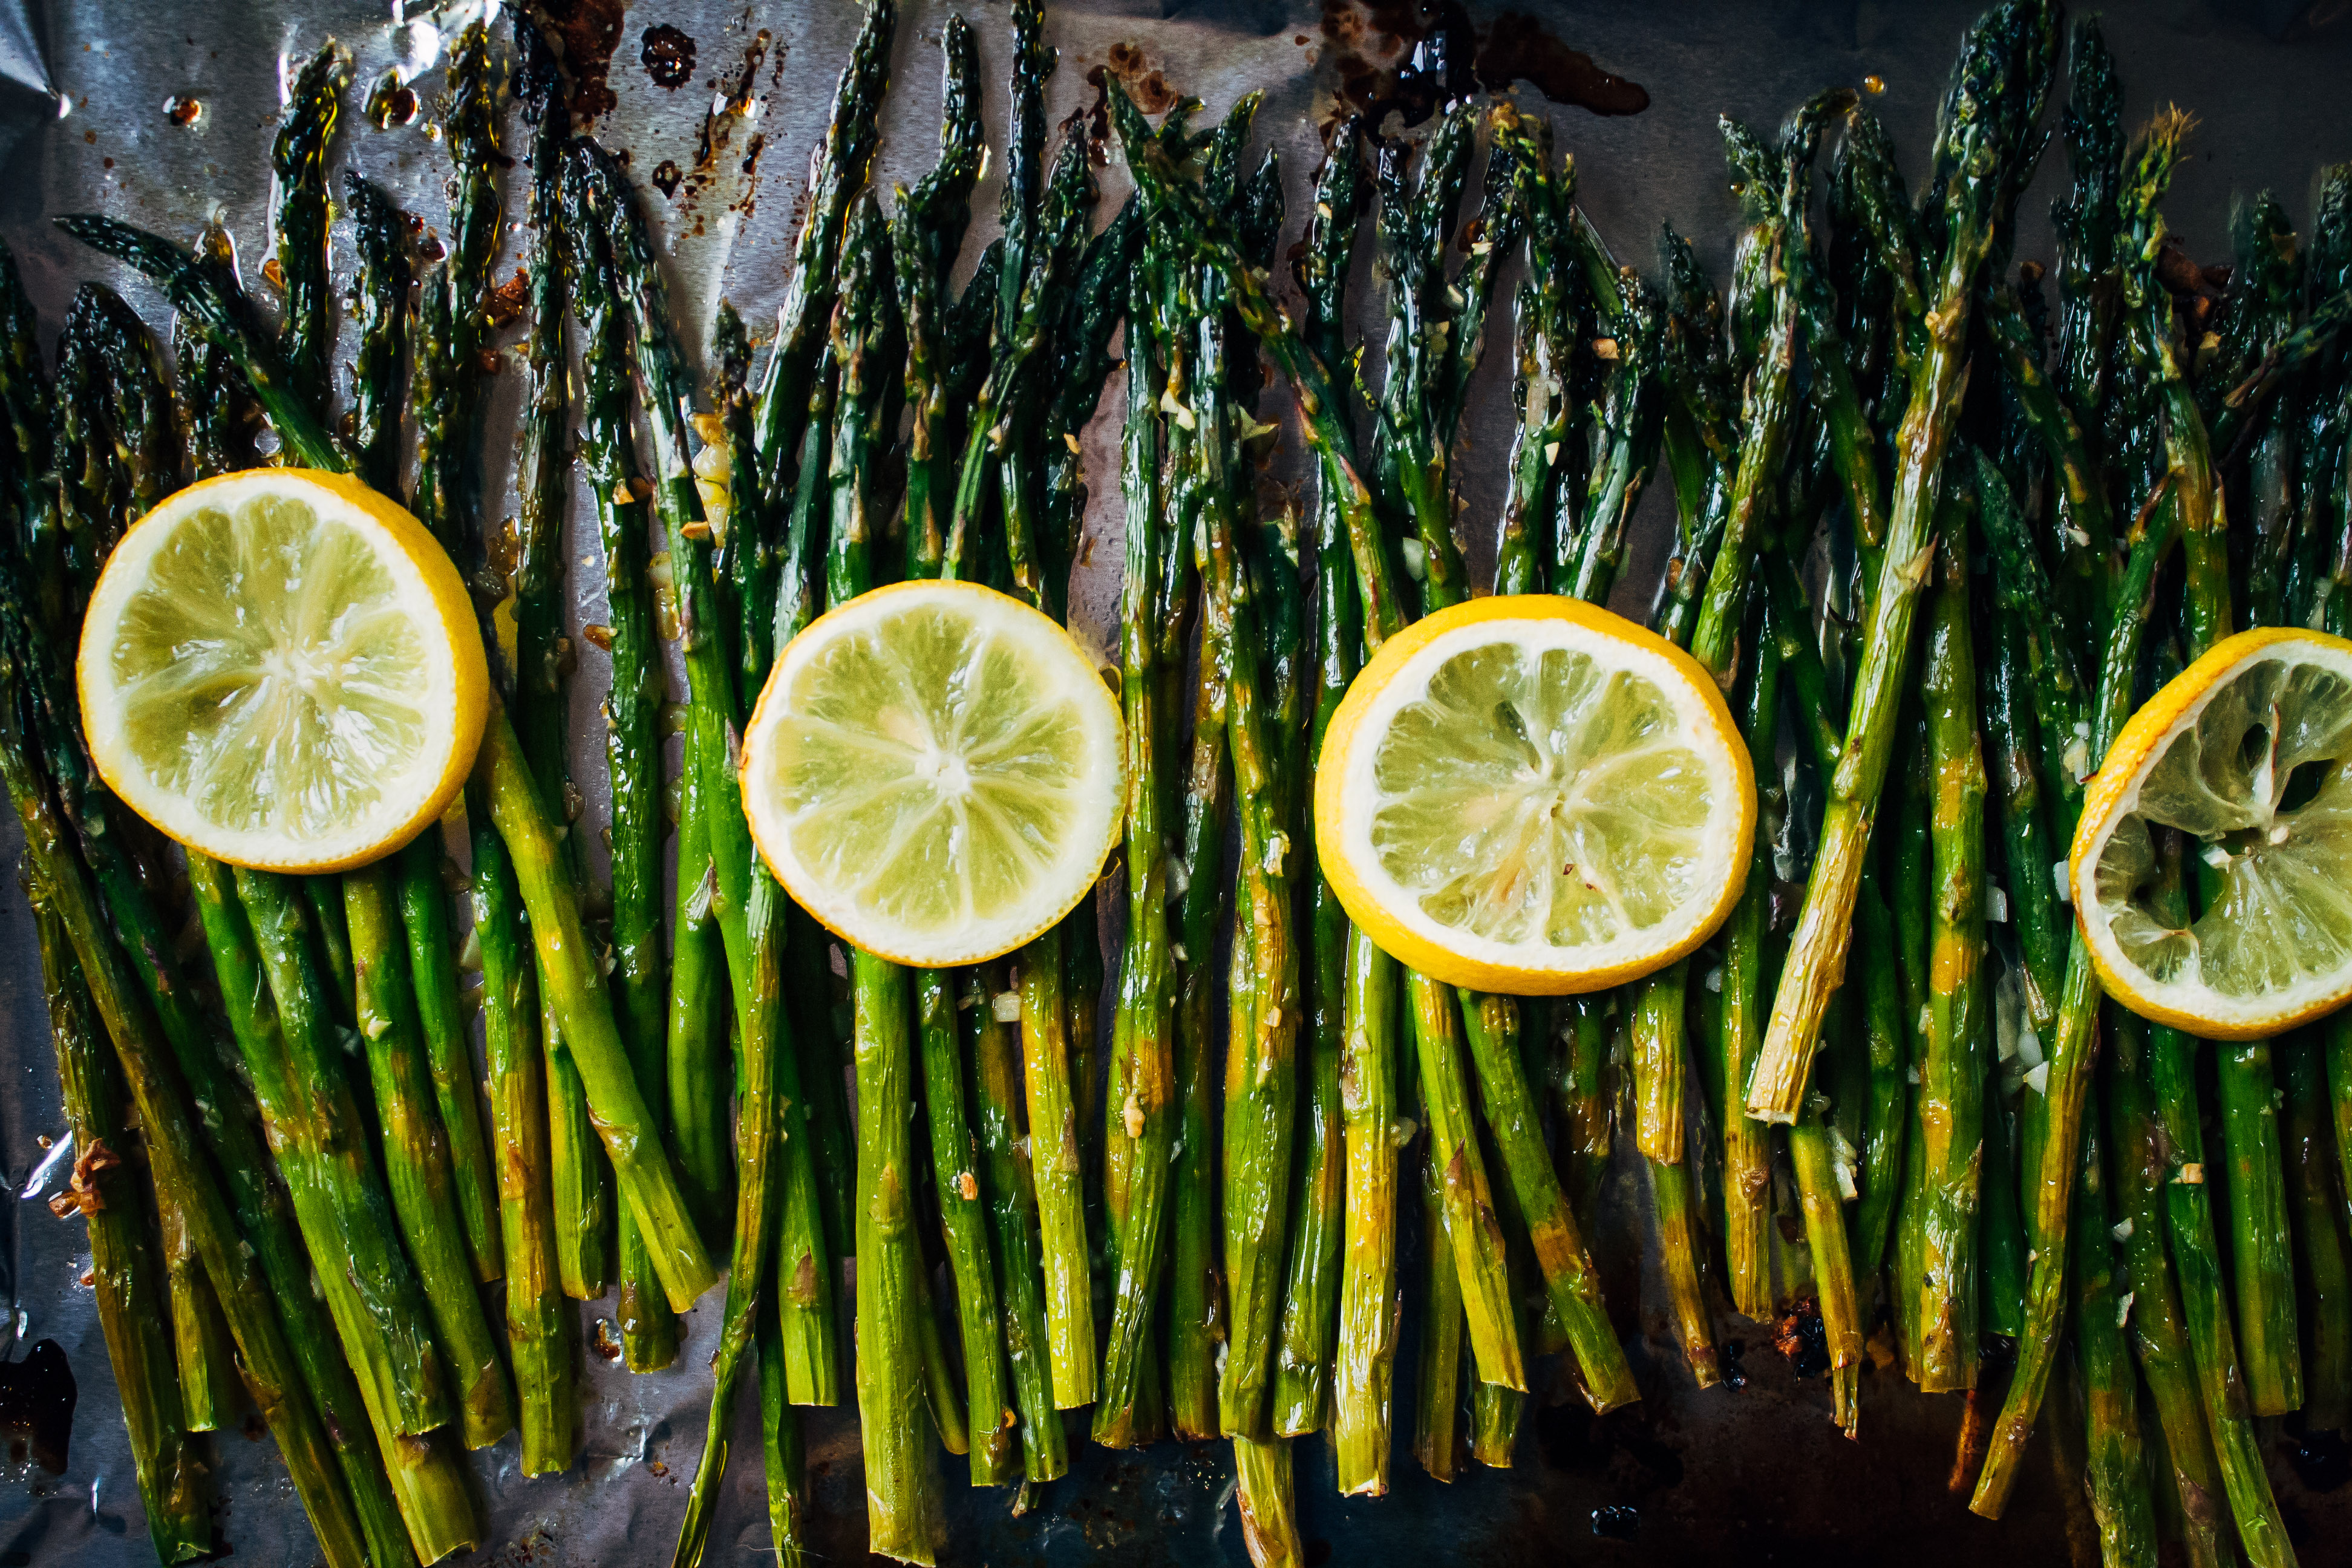 The Best Roasted Asparagus + A Lemony Herb Spring Pasta | Well and Full | #vegan #pasta #recipe